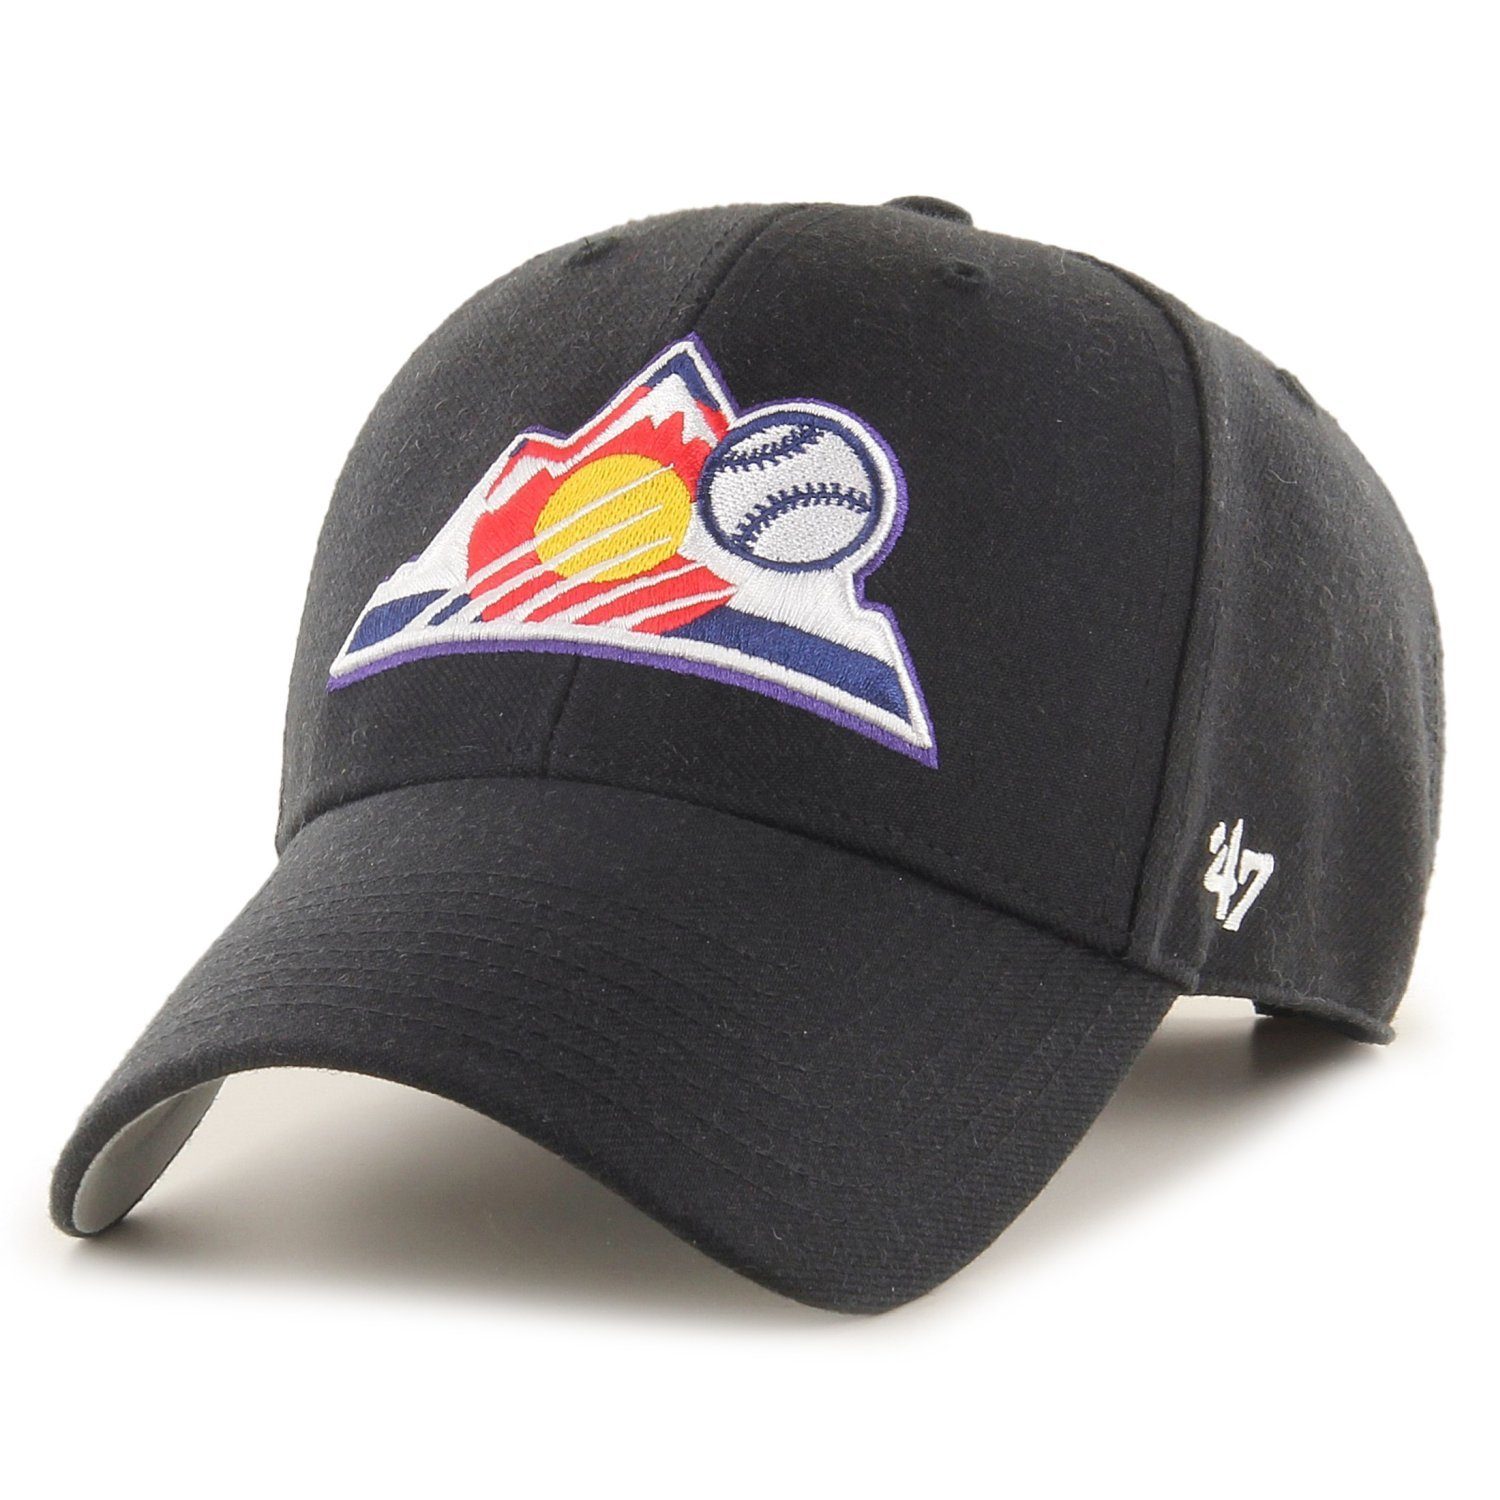 Rockies Colorado Brand Cap MLB '47 Trucker Relaxed Fit